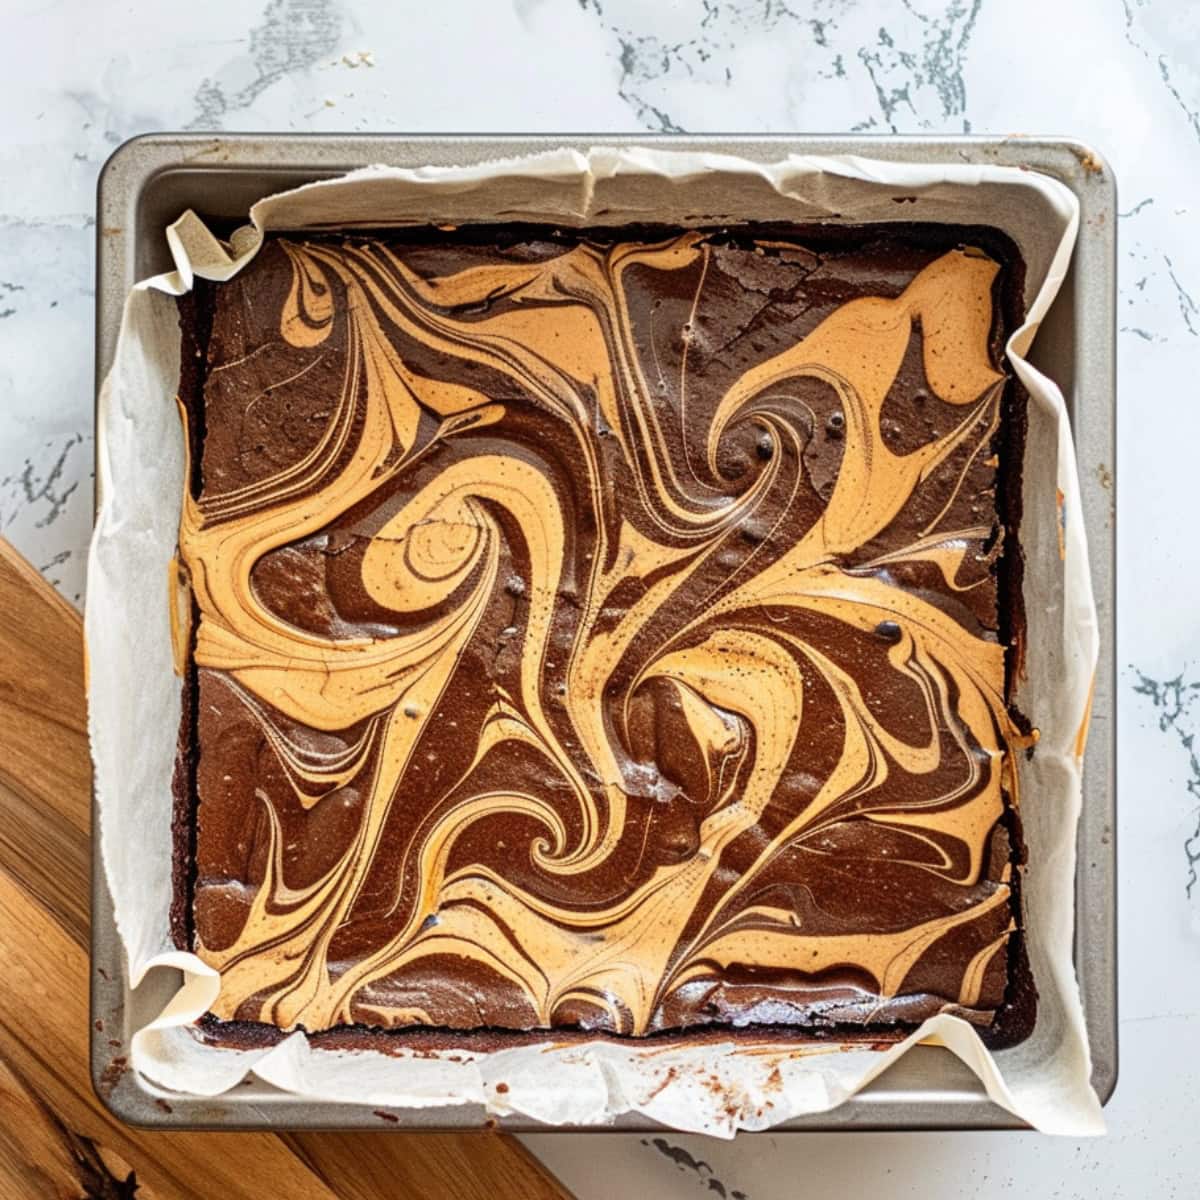 Whole peanut butter brownies in a baking pan with parchment paper.